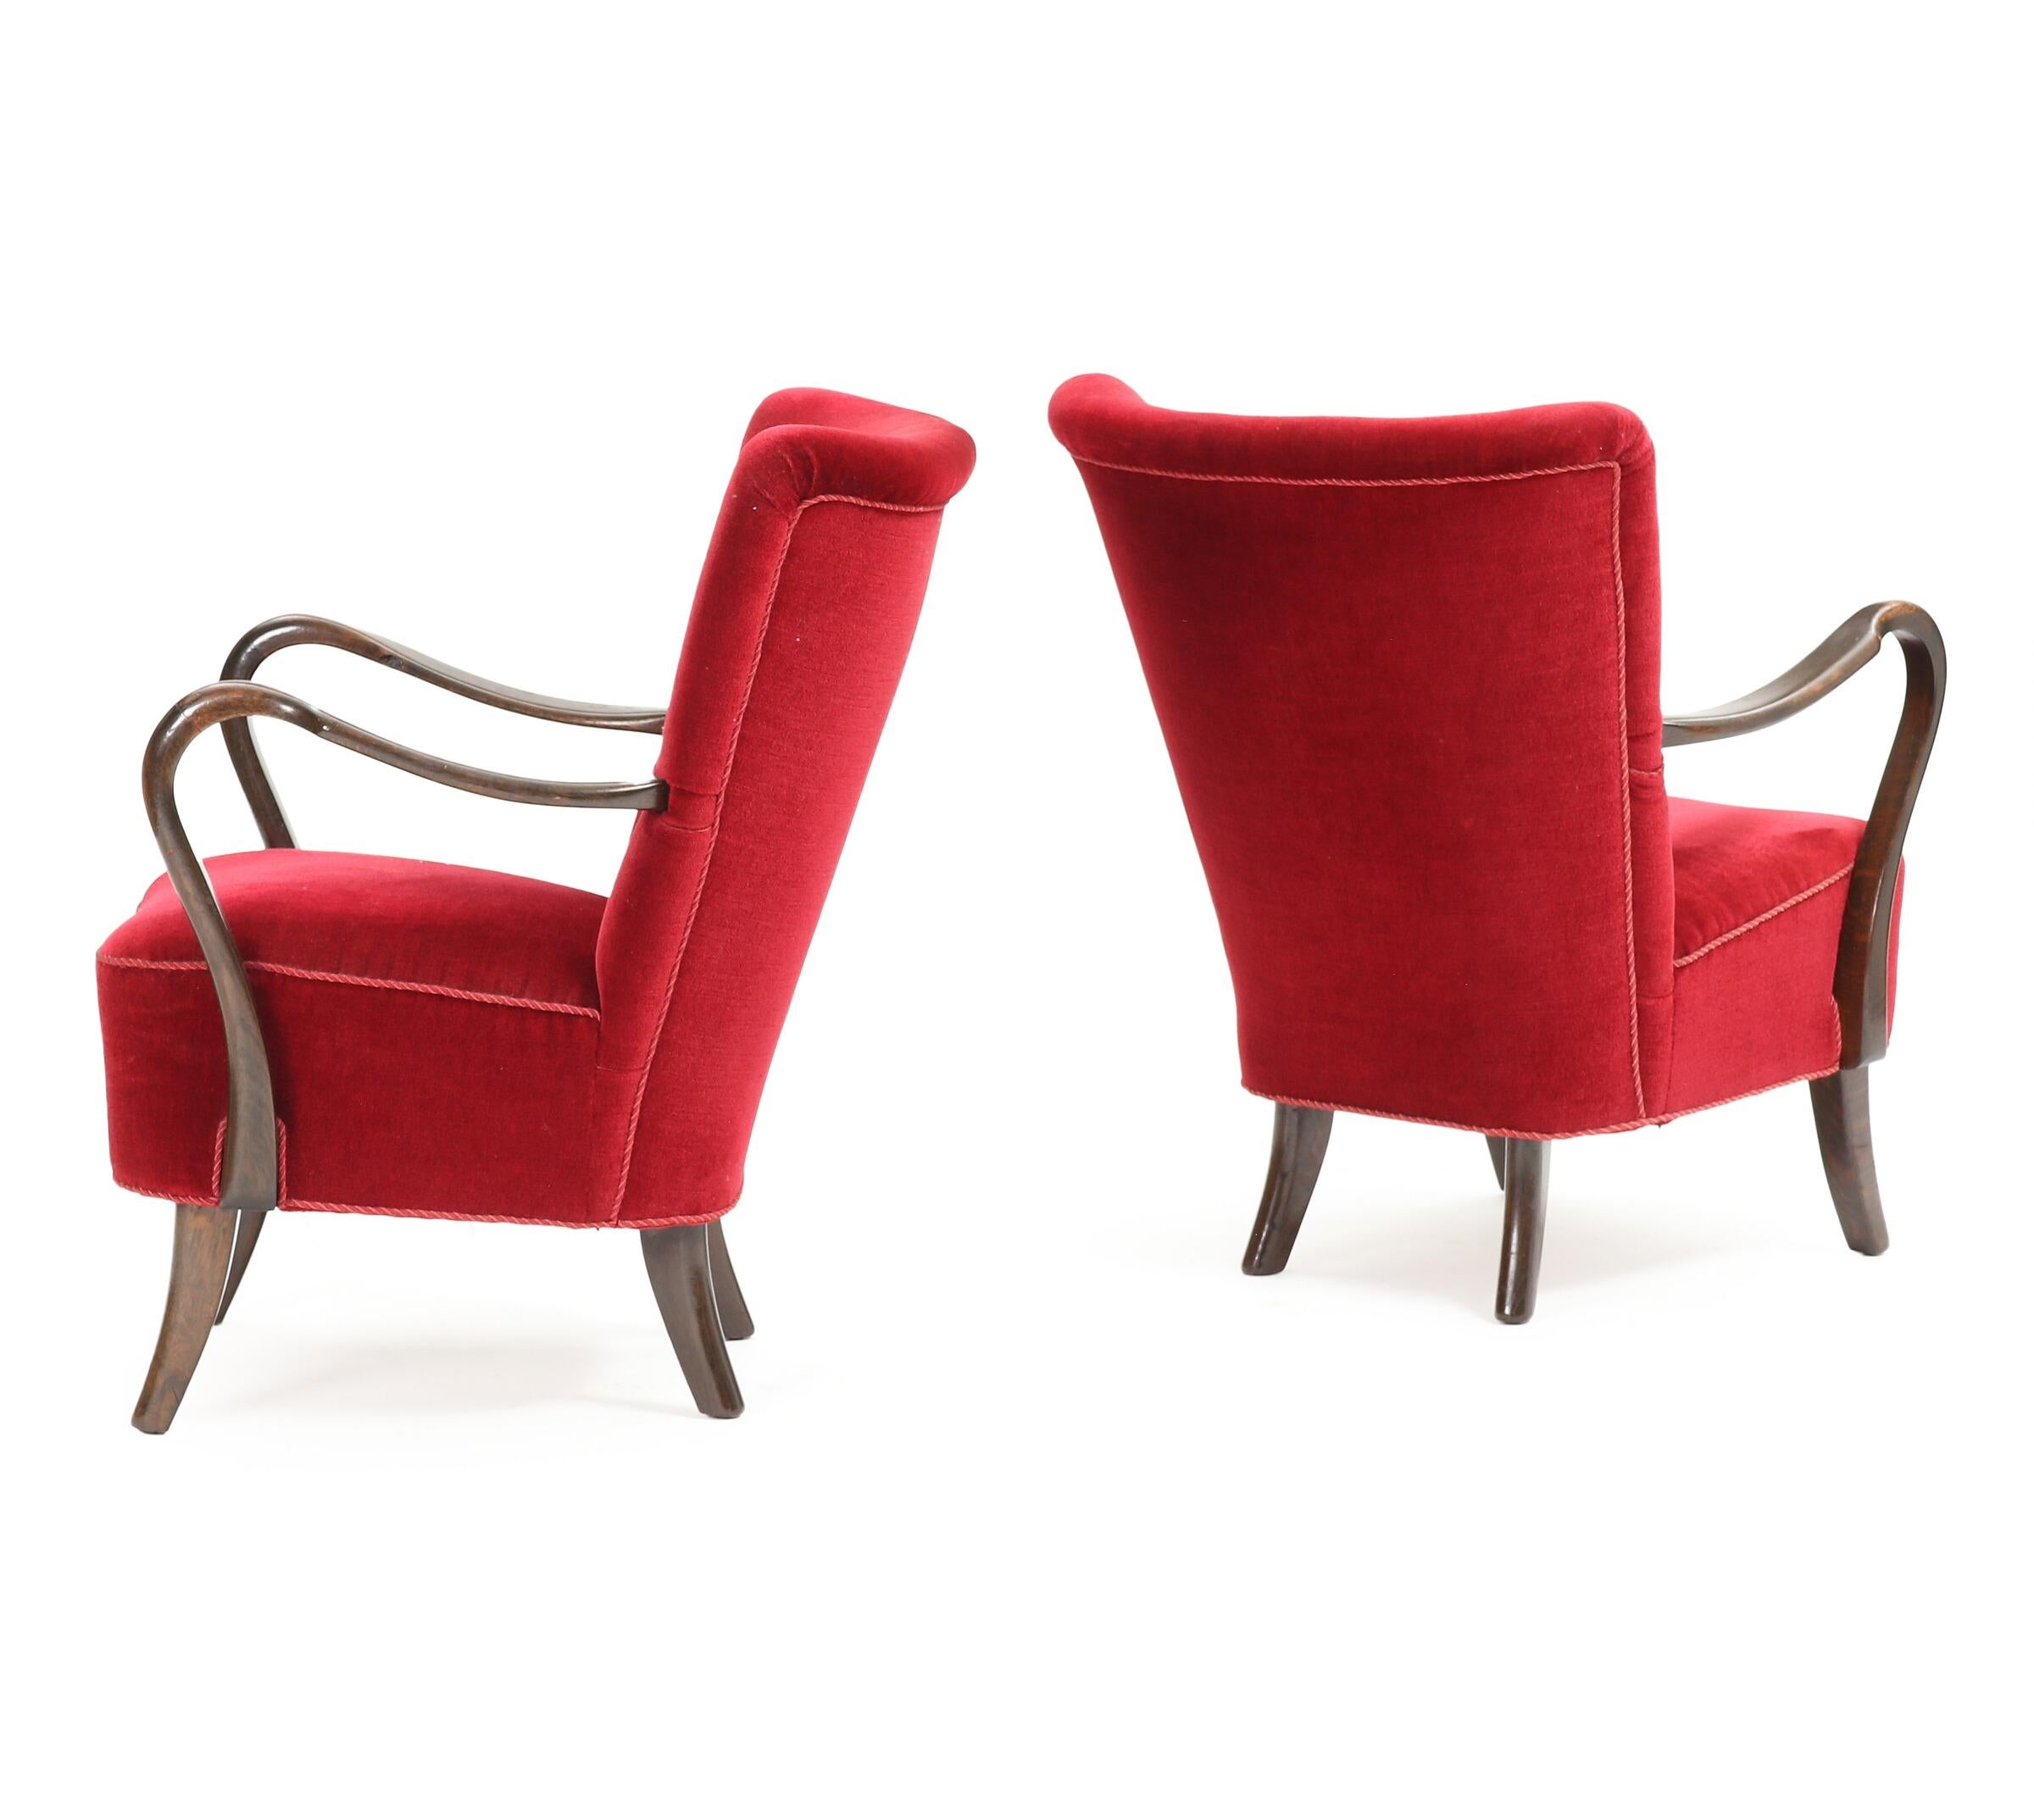 A pair of Danish modern easy chairs with stained beech frames by designer Alfred Christensen. These chairs are distinctive with their curved wood open arms. Upholstered in red velour in good condition. Manufactured by Slagelse Møbelværk in 1940s.